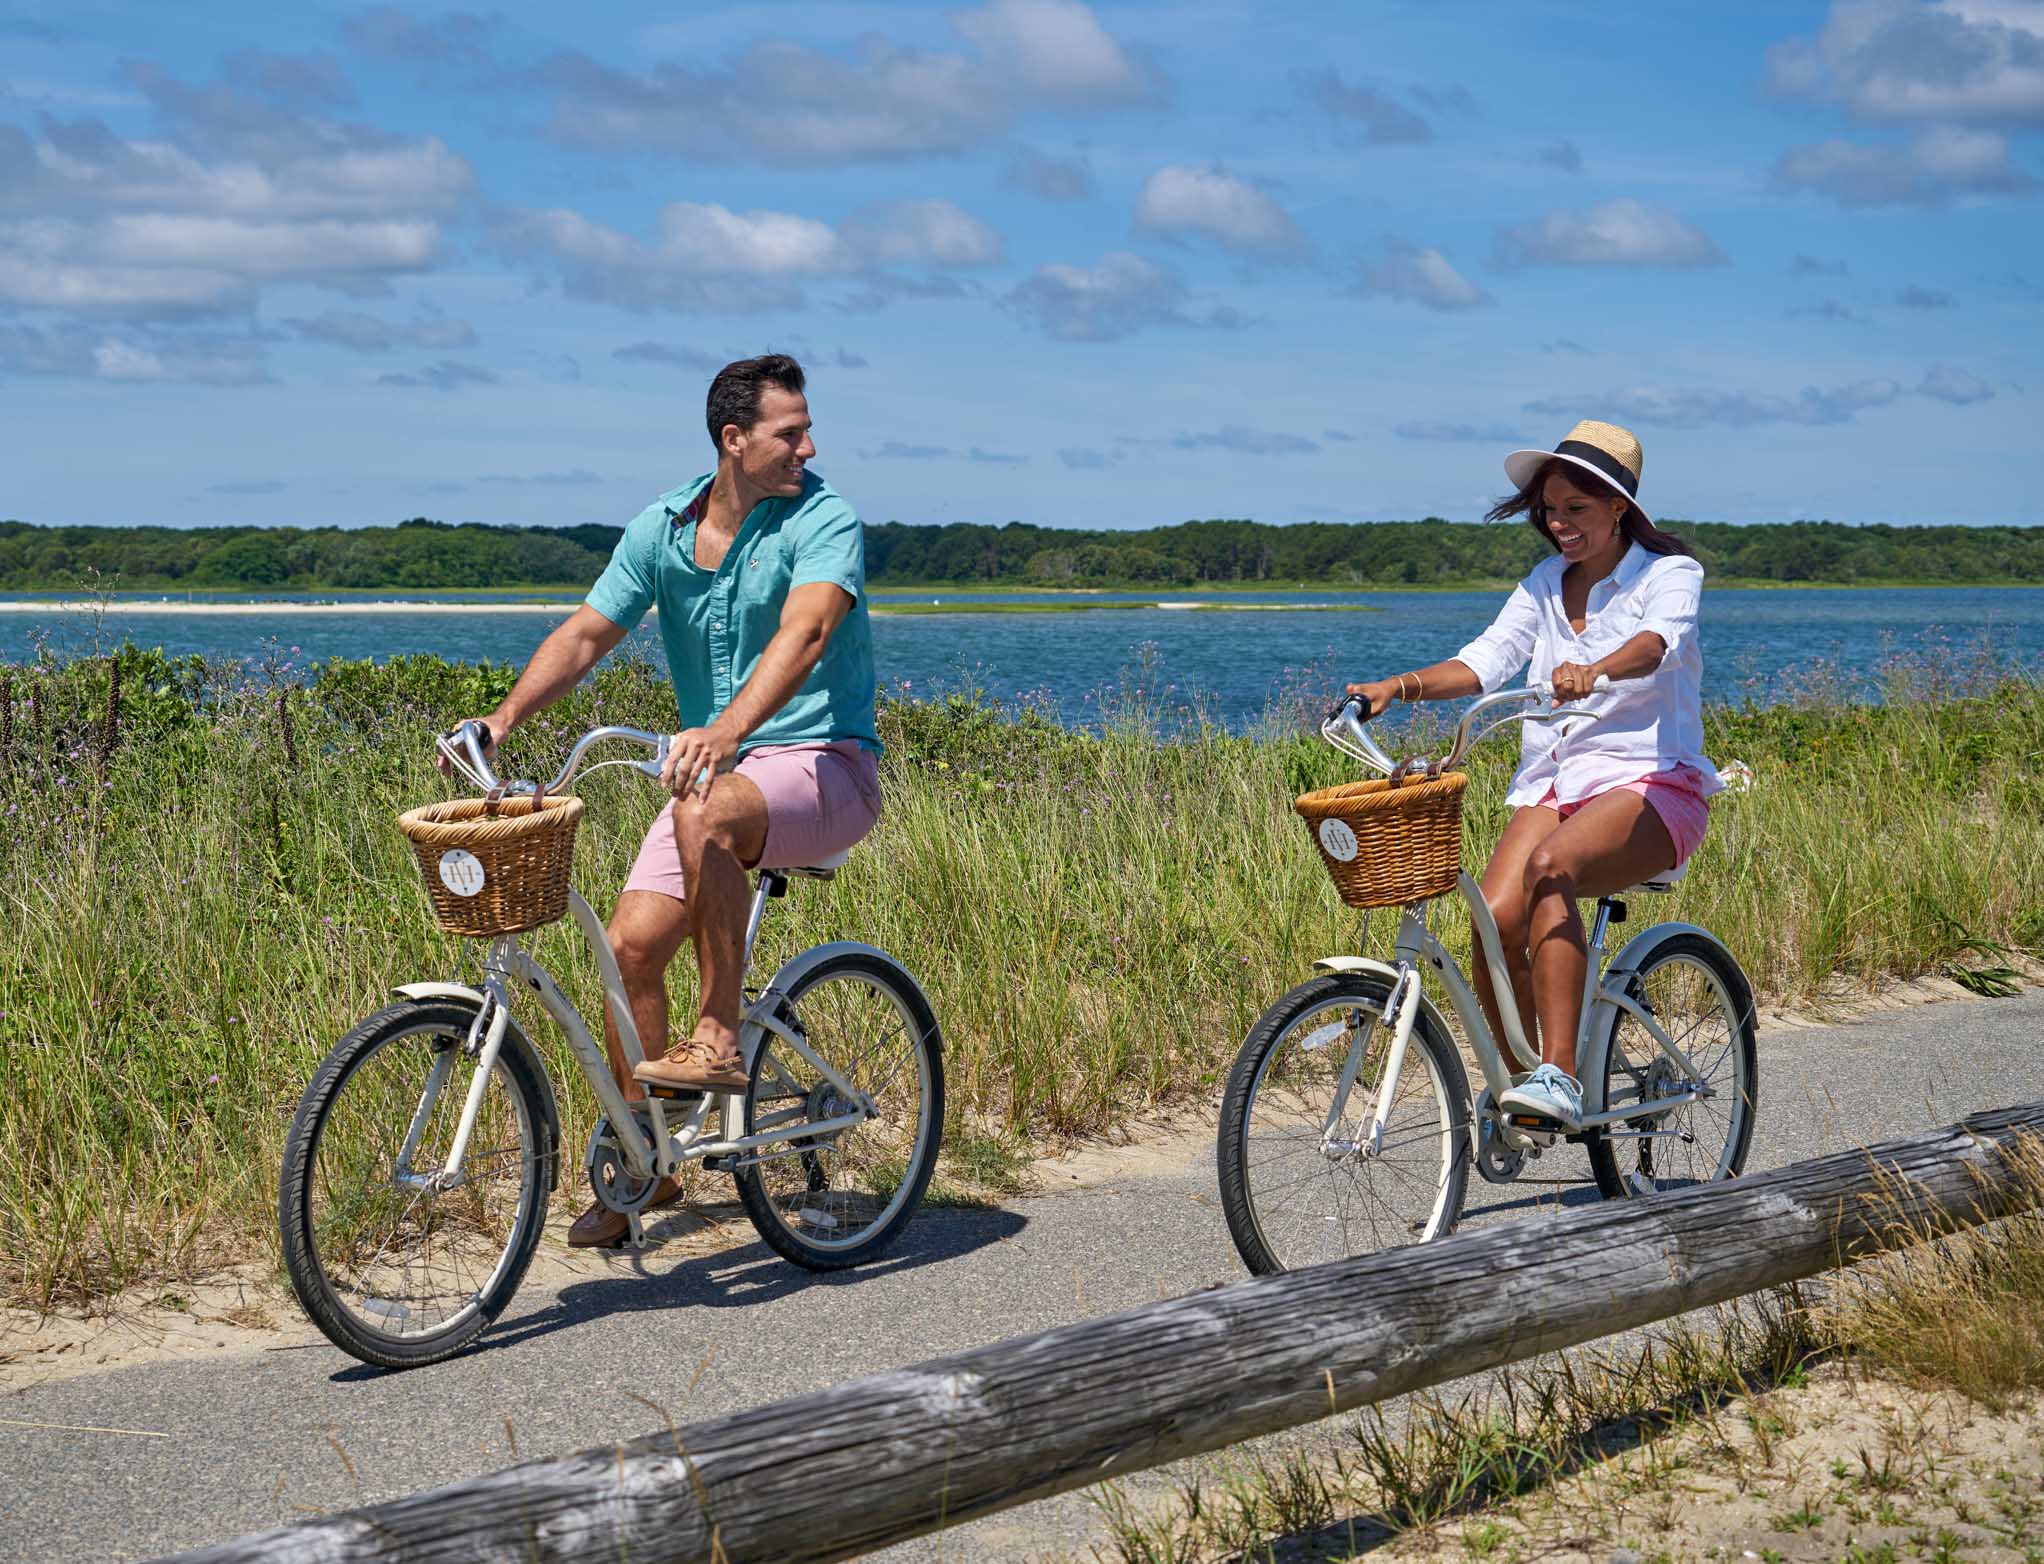 Couple riding bikes by the shore together